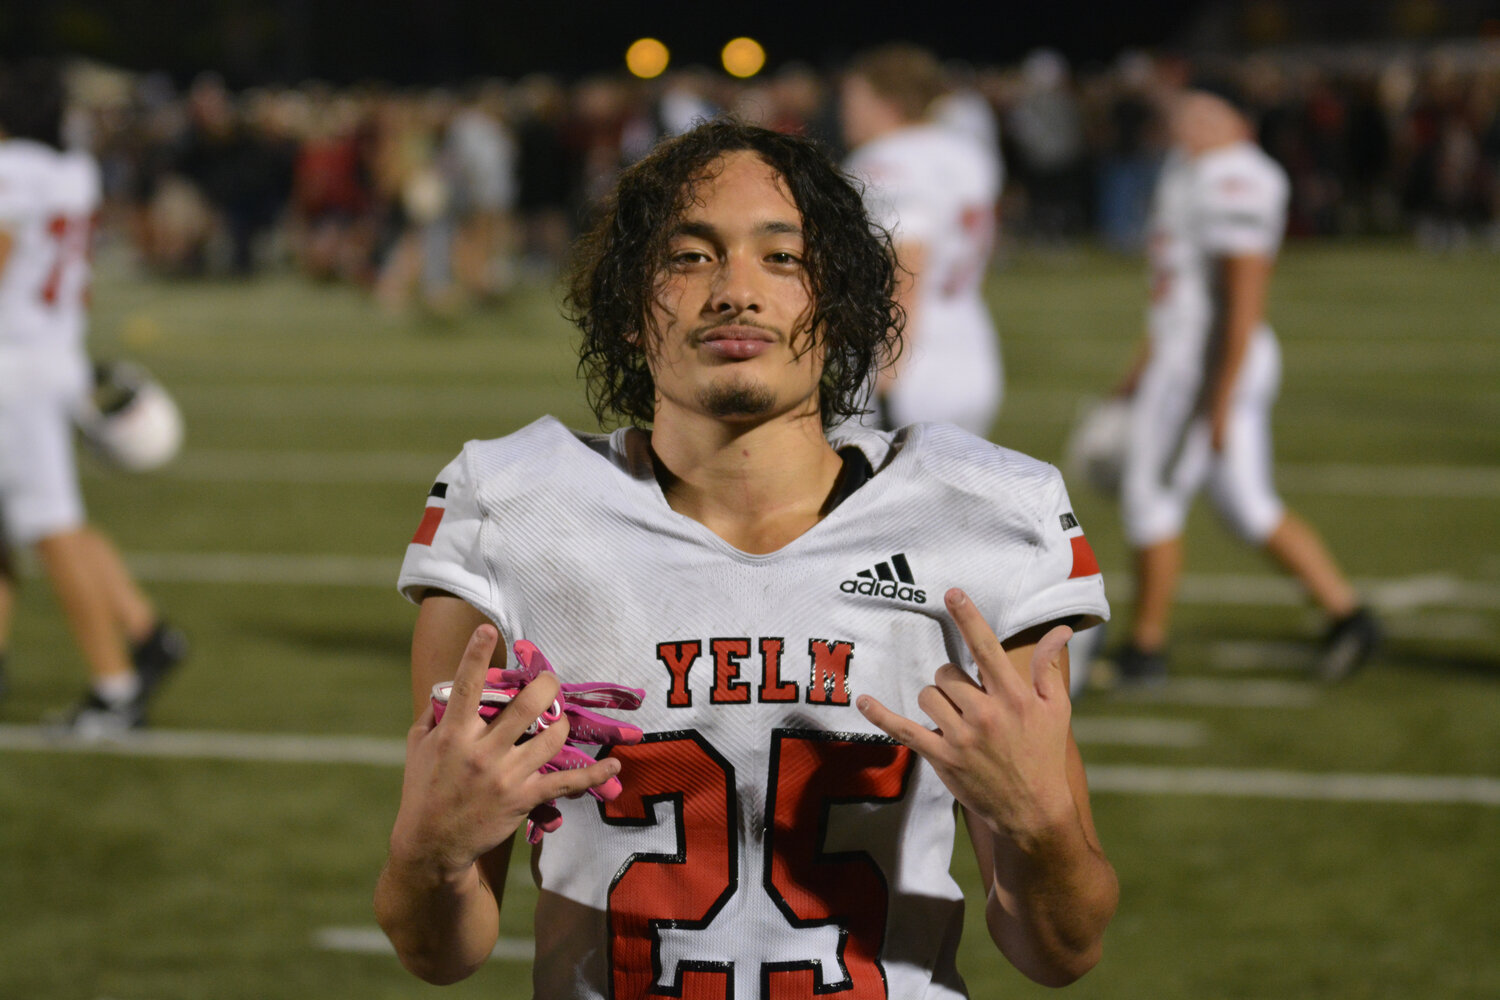 Senior linebacker Anthony Kiamco, who blocked a potential game winning Camas field goal late in the fourth quarter, poses after the contest on Sept. 3.